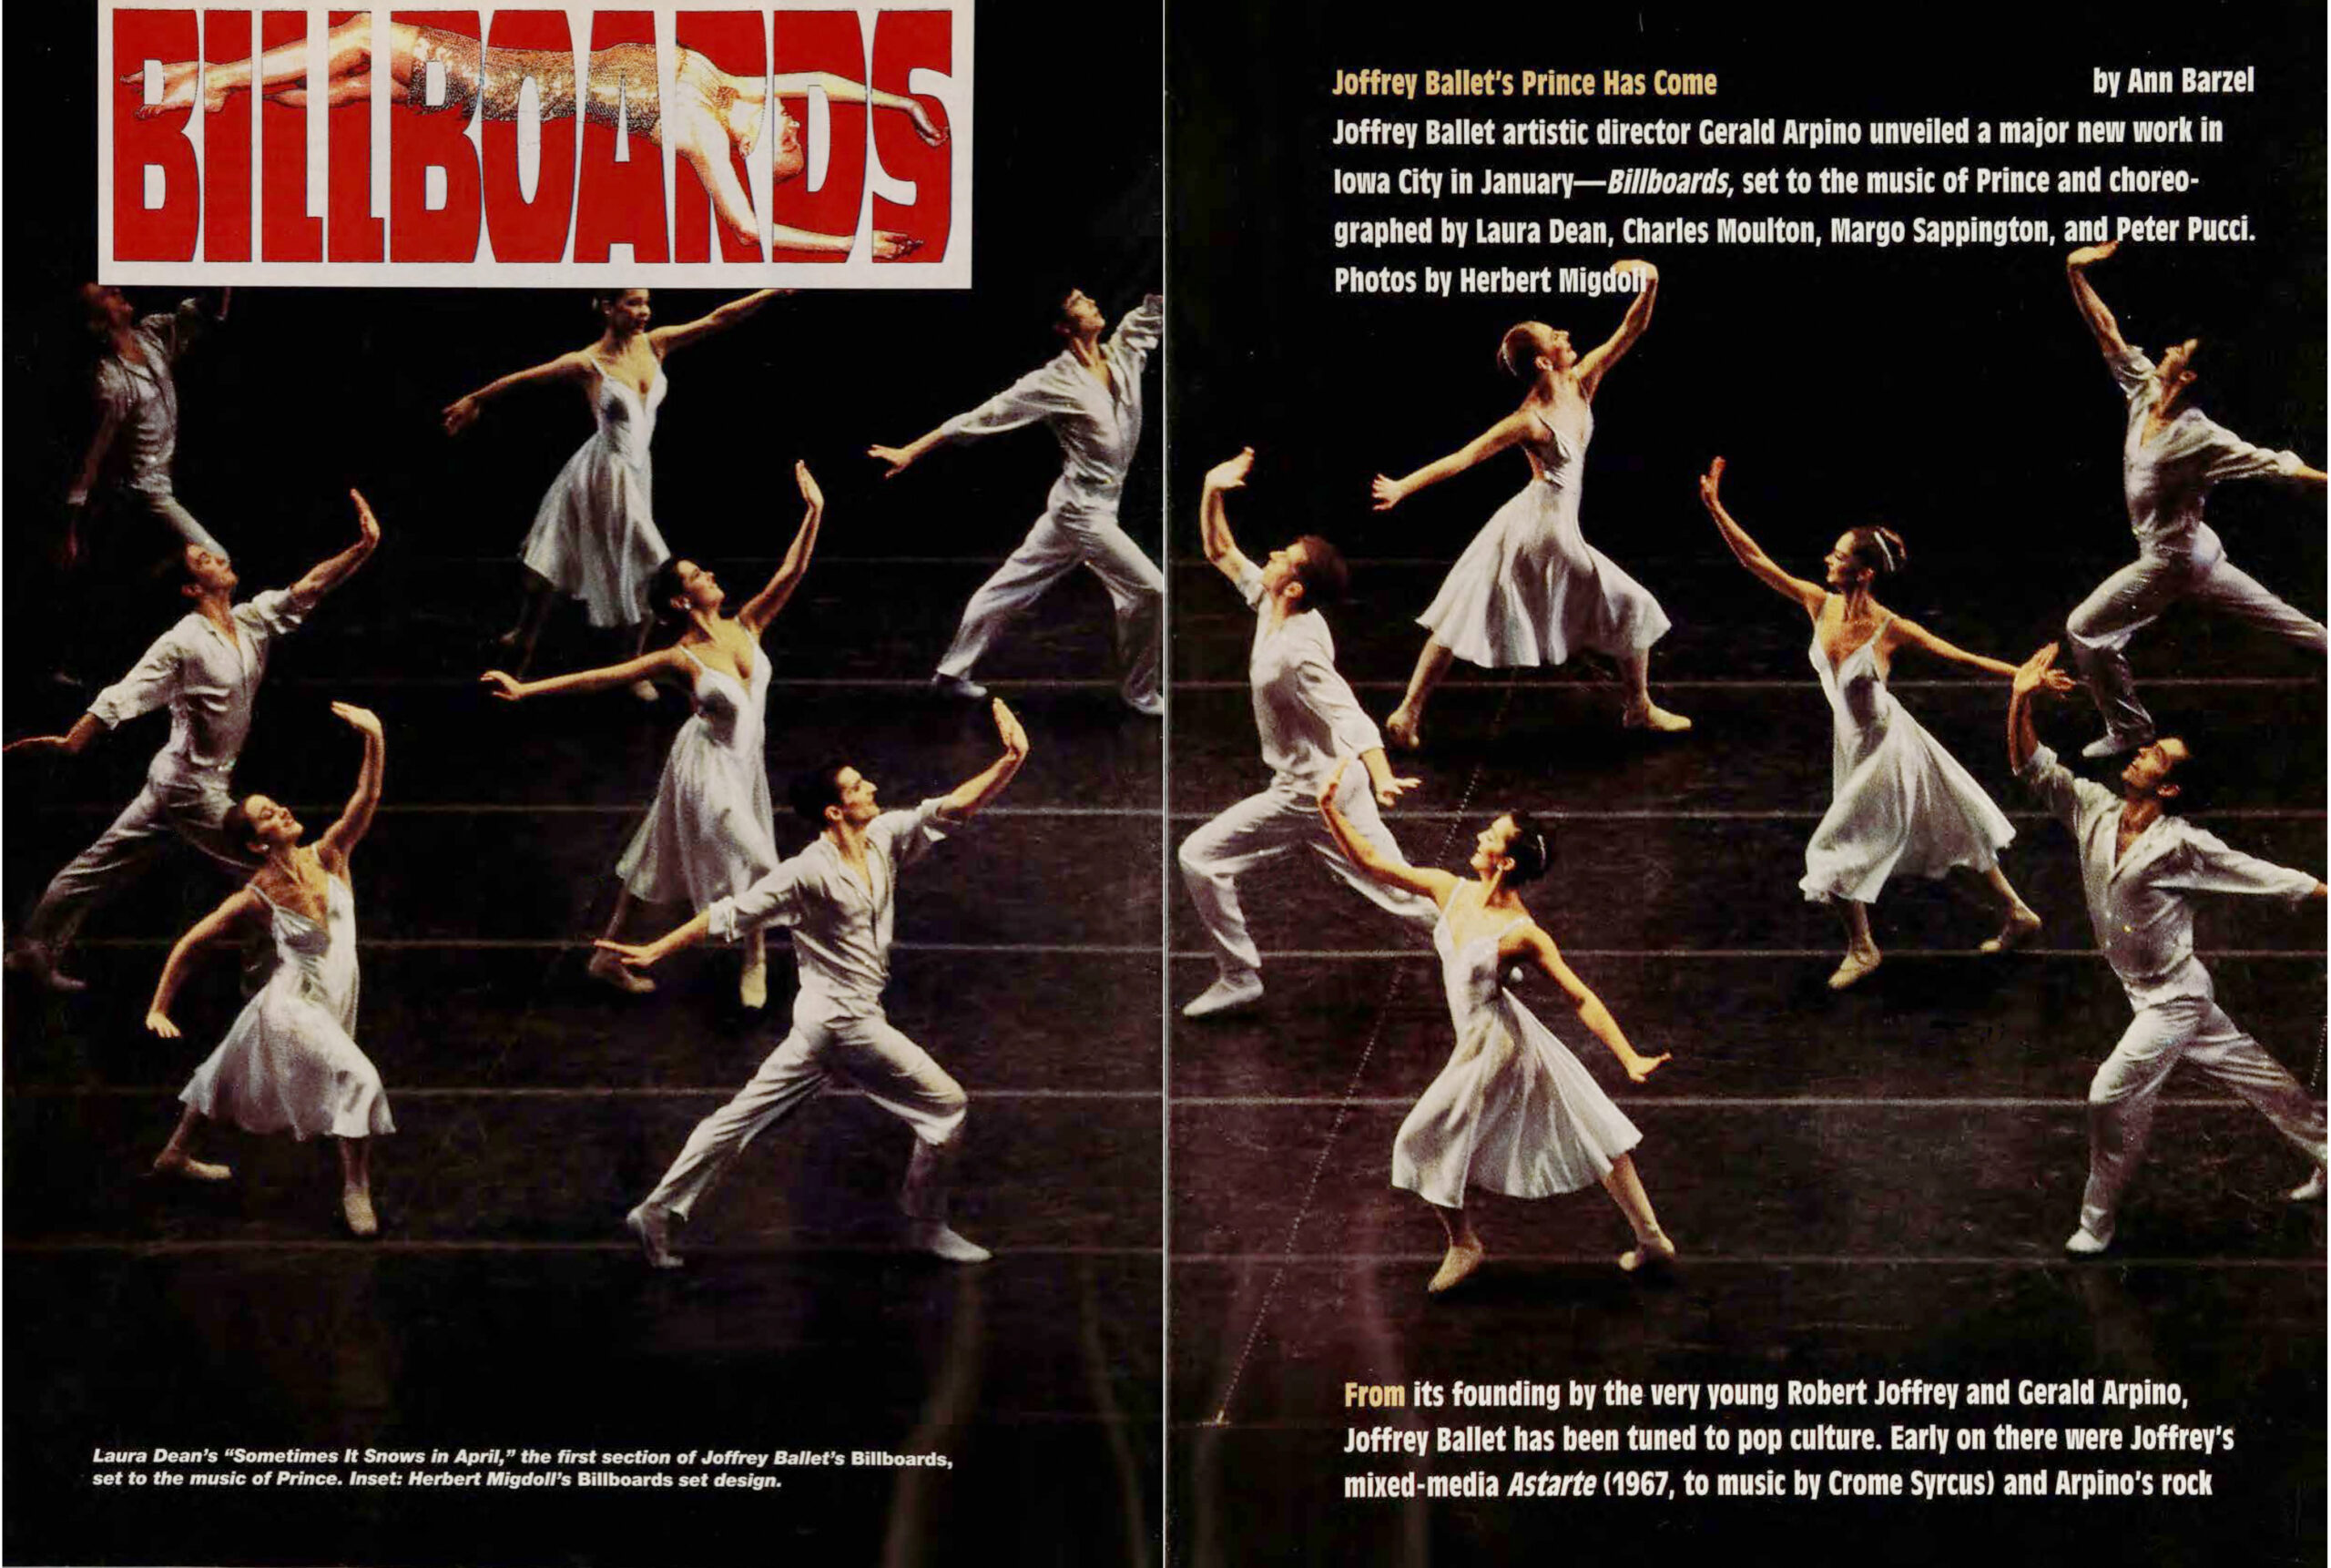 A spread shows dancers in pale costumes on a dark stage. All lunge with arms extended, wrists flexed. Some face stage right, others stage left. Superimposed is a poster that says BILLBOARDS in large red letters, a reclining dancer superimposed against it.